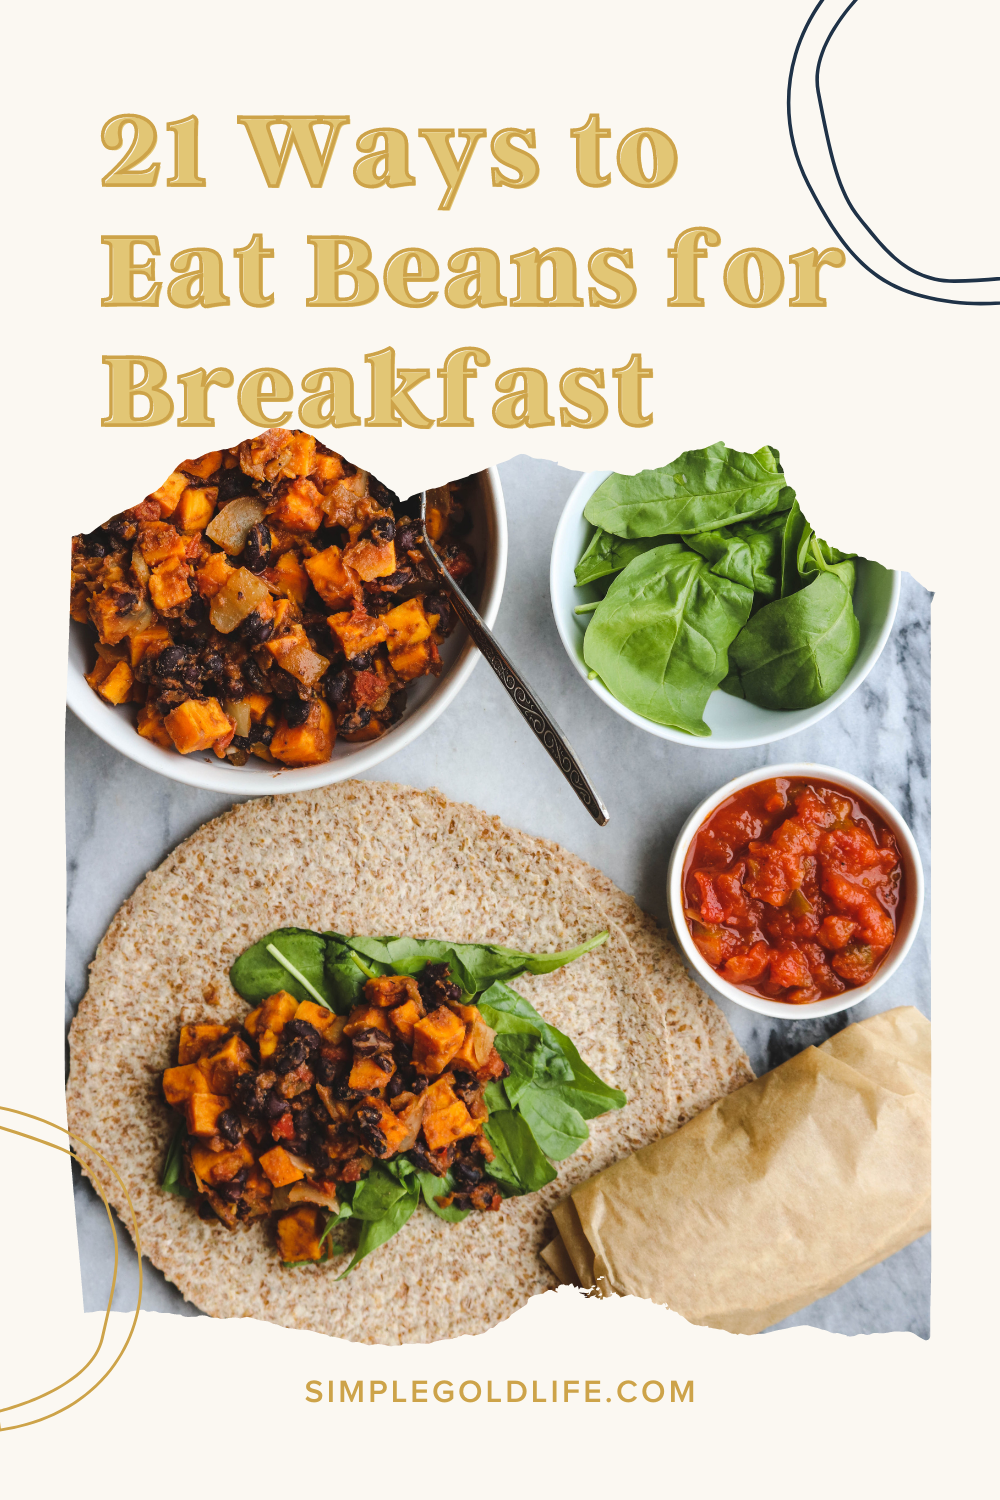  Time for yummy bean for breakfast recipes. Get classic variations with beans. 